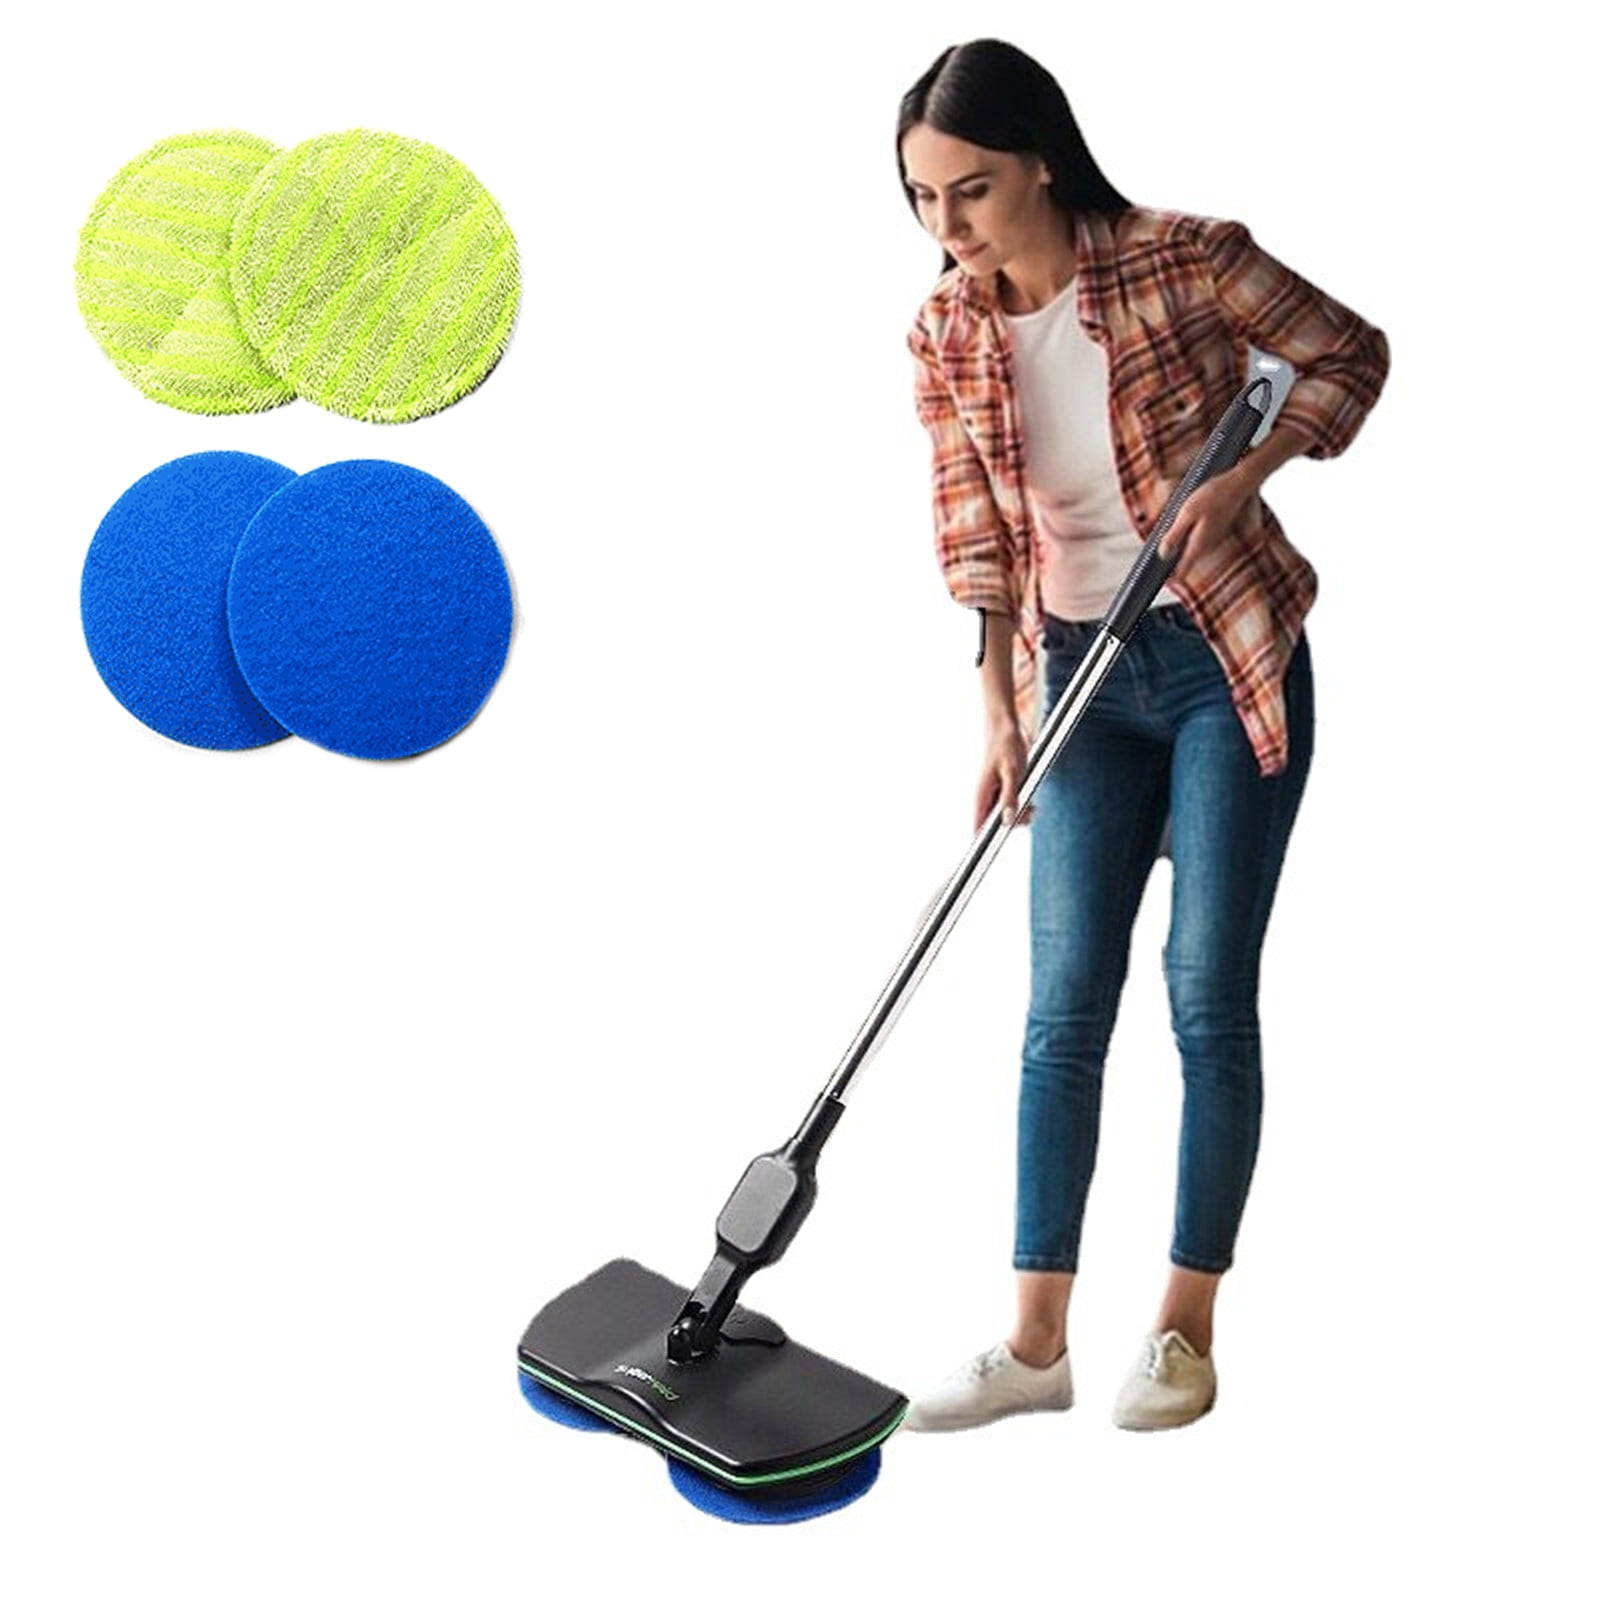 Household Simplicityelectric Spin Household Simplicity Mops,Cordless Effortless Floor Cleaner Household Cleaning Household Simplicity Mop Auto Rotating Household Simplicity Mop Polisher and Scrubber 